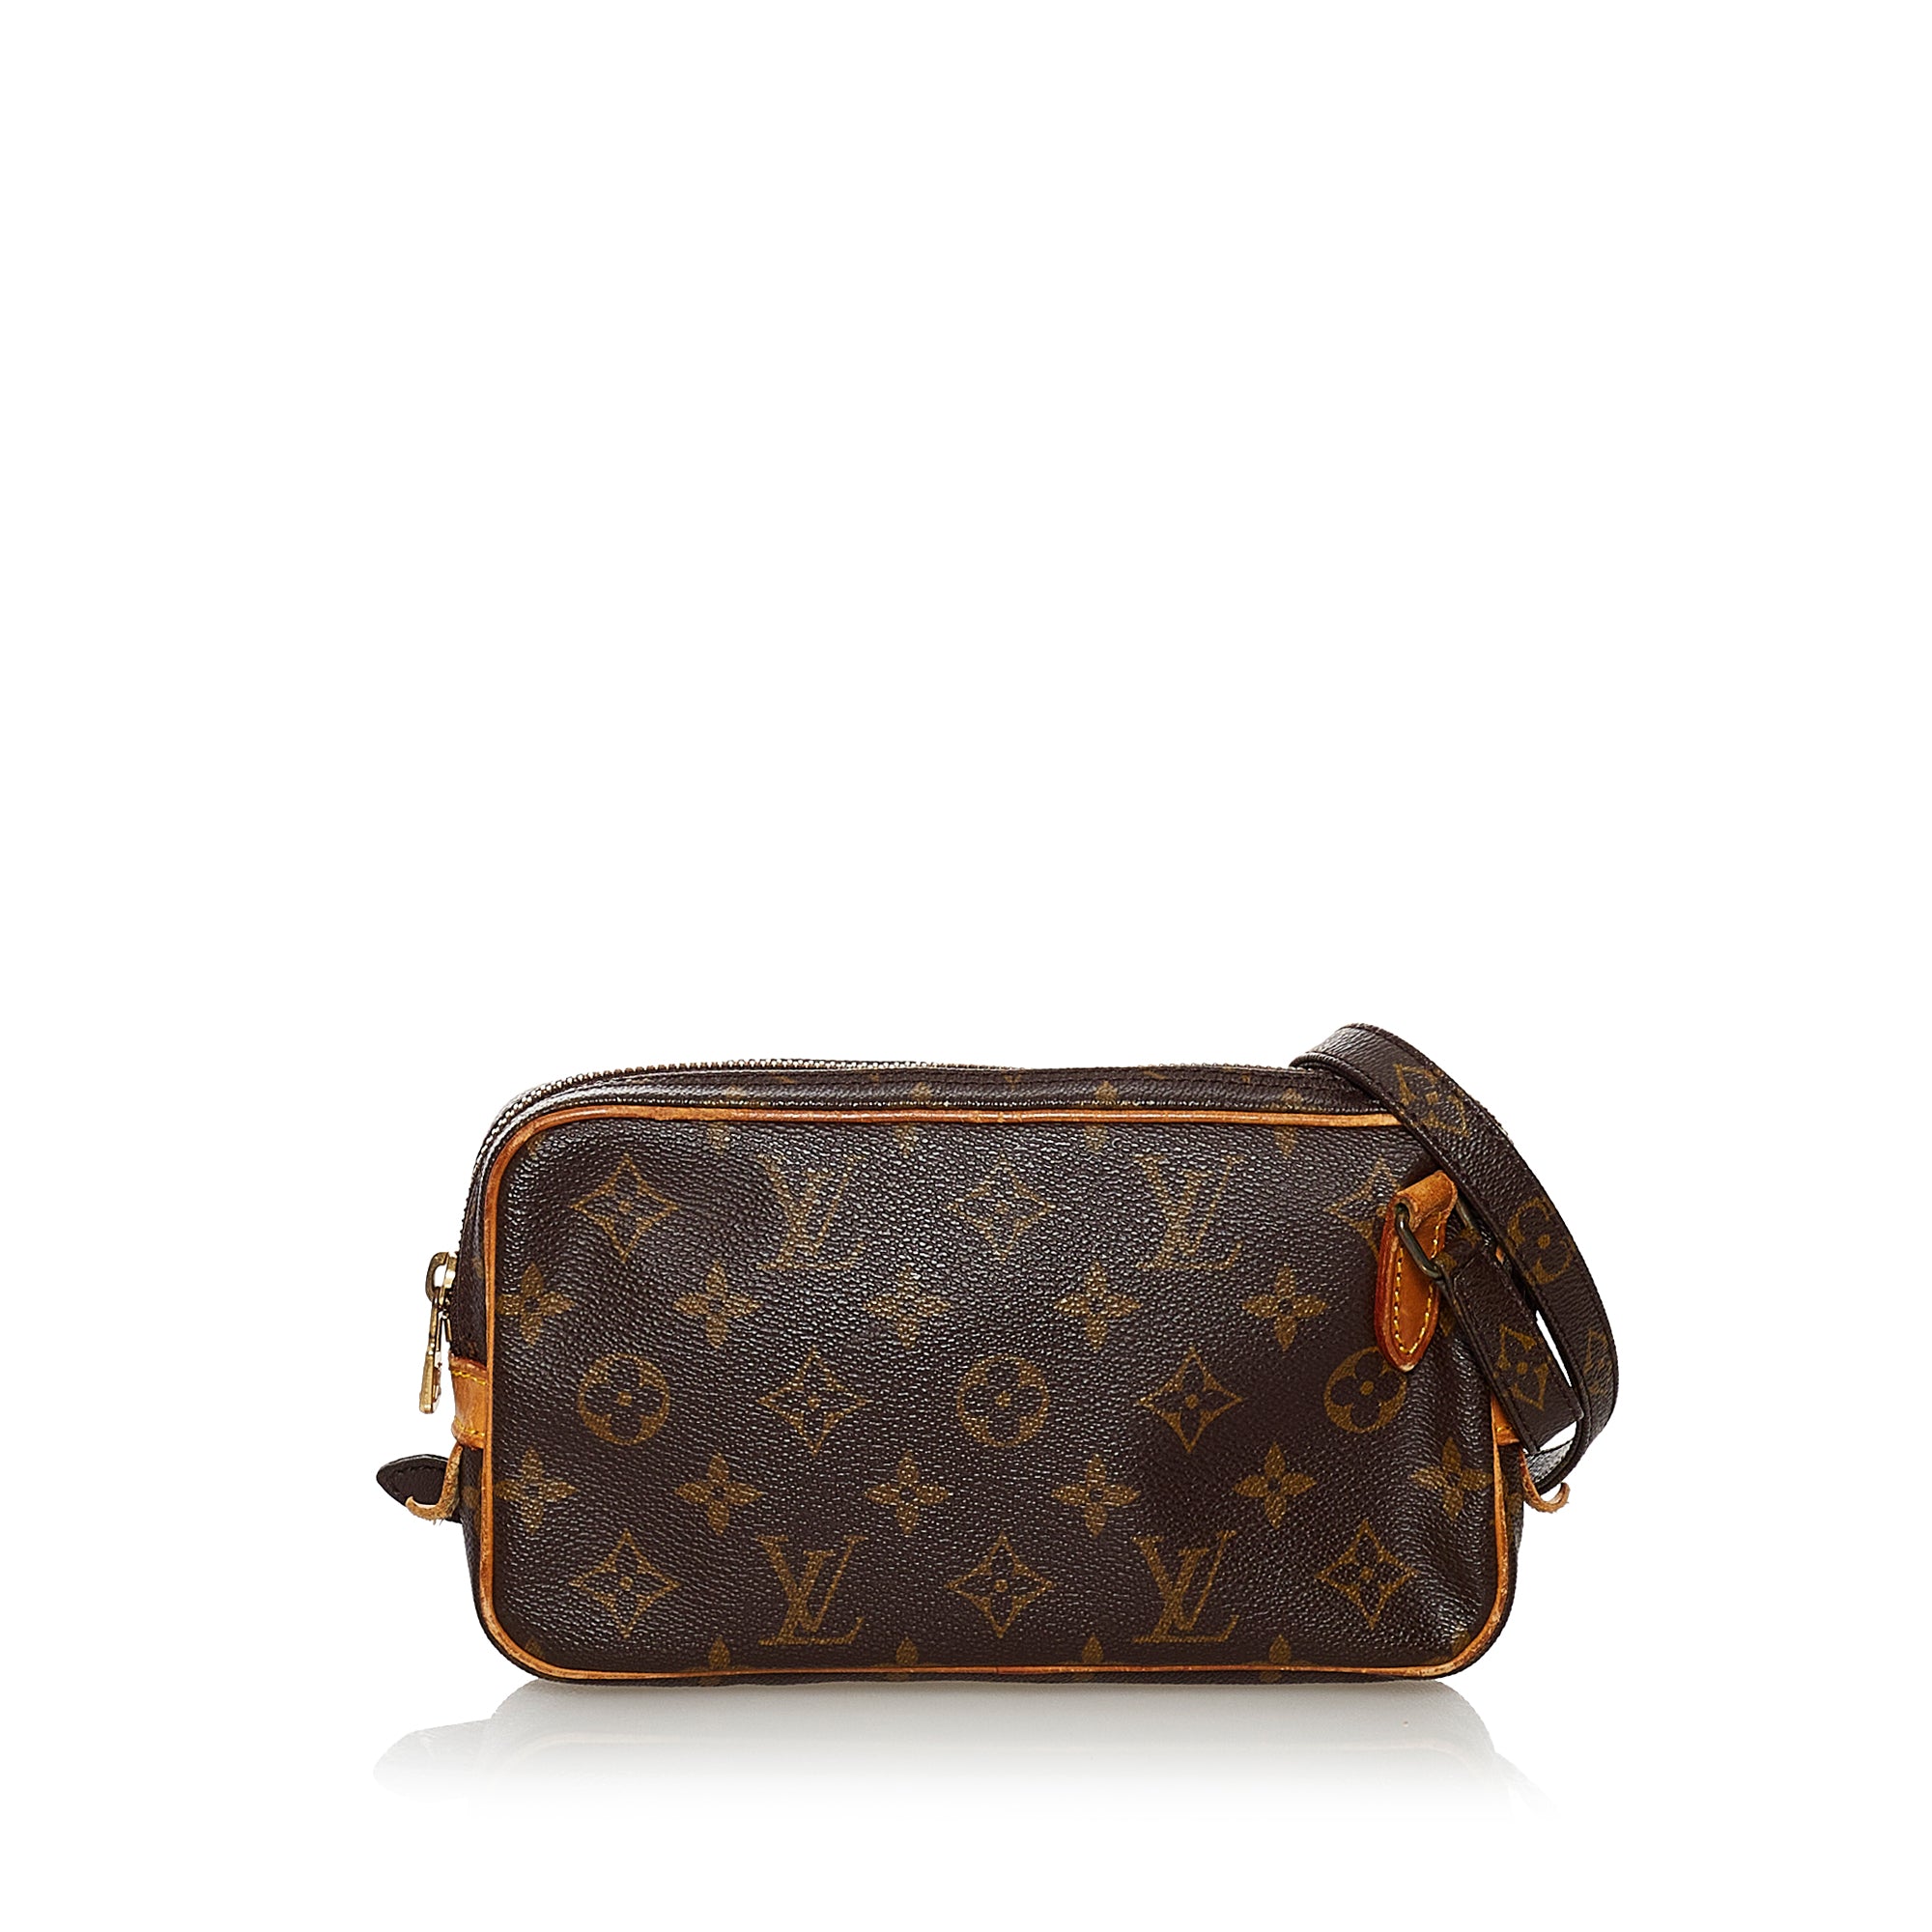 PreOrderAuthentic Louis Vuitton Monogram Marly Bandouliere